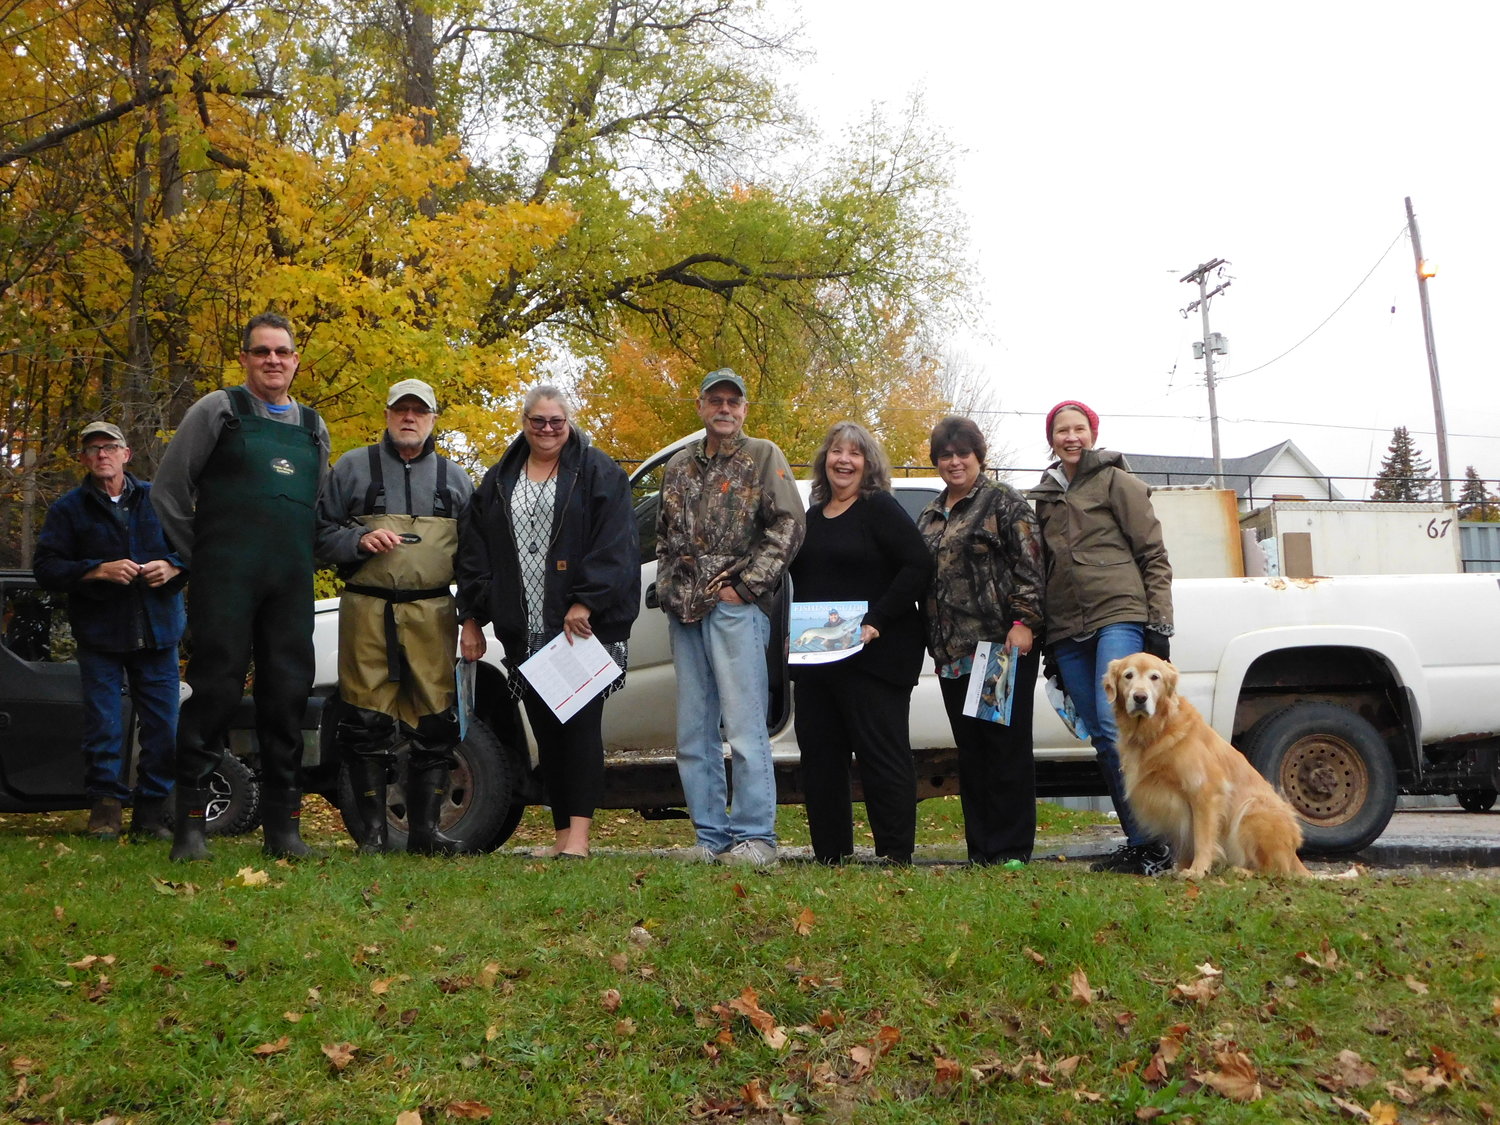 Participants in the blustery Oct. 25 Budd Lake fish planting gather for a group shot. They include, from left, Don Sisson of Imlay City Fish Farm; Ernie Teall and Jerry McBrien of the Budd Lake Association; Tracy Wheeler-Clay, City of Harrison; Ken Koehler, resident; Connie Cauchi, Harrison City Council member; Kathy Maharas, City of Harrison utilities clerk; and Terri Koehler, also BLA.